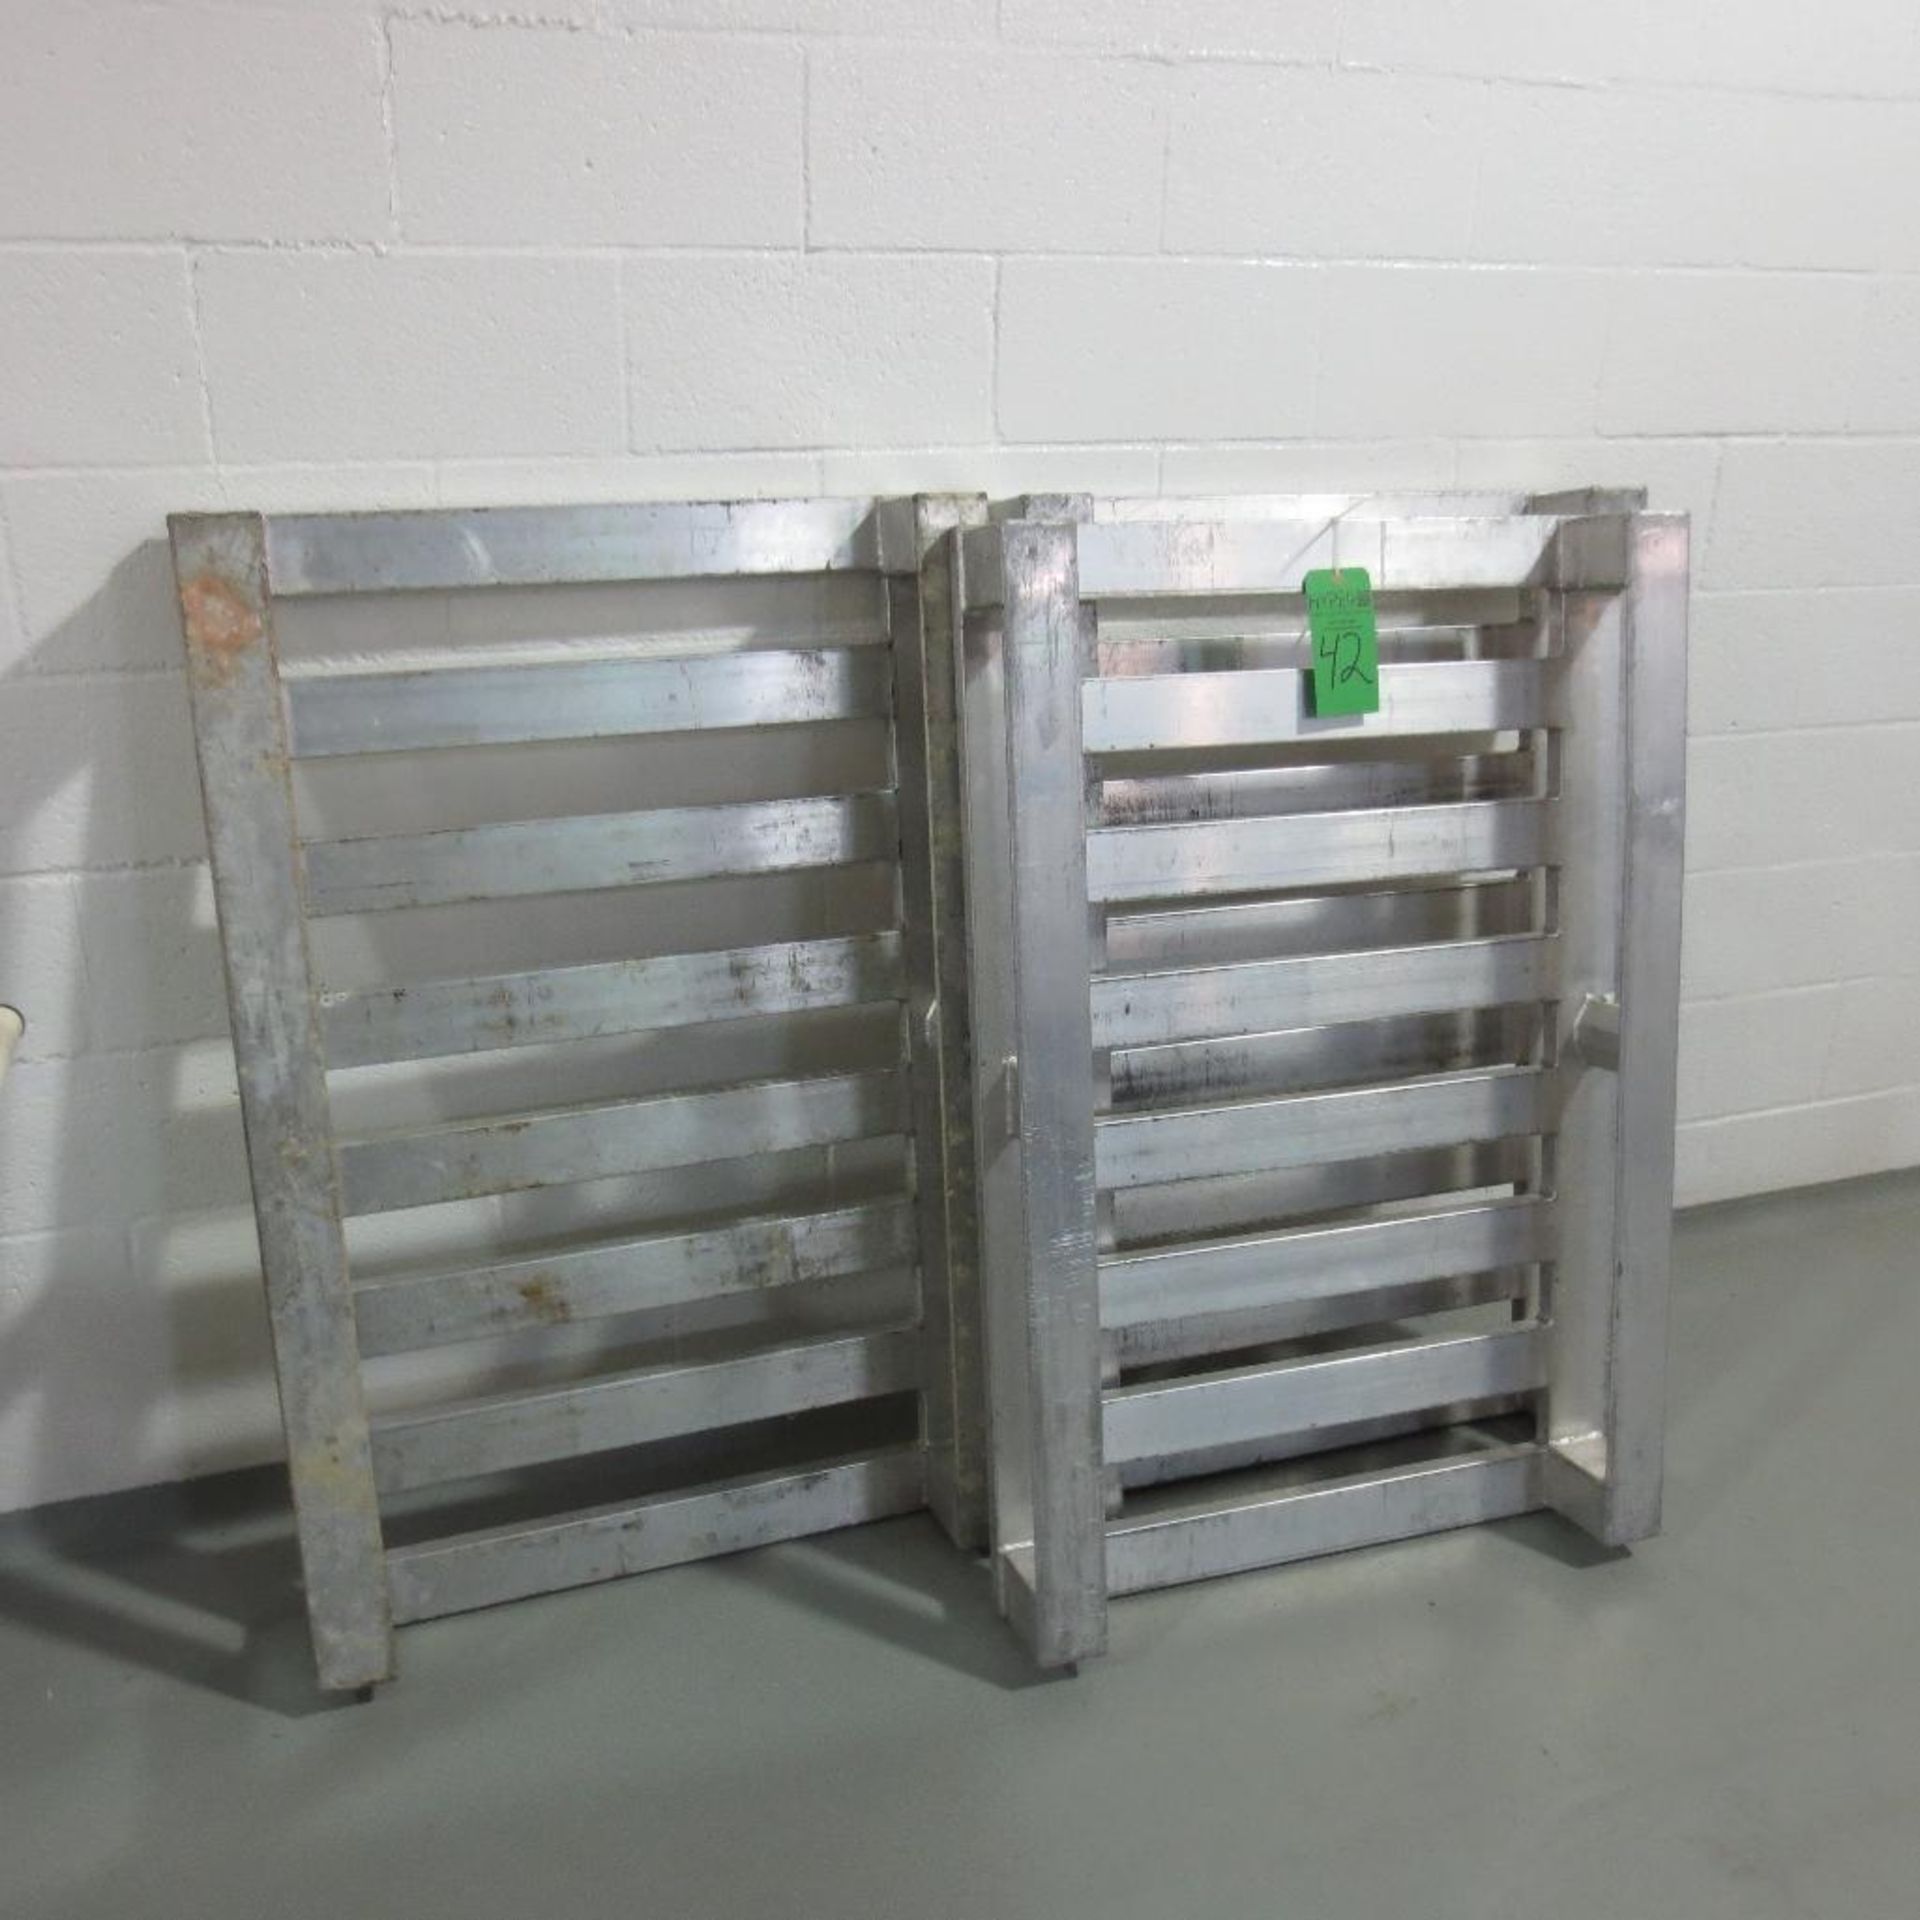 (3) Alm. Pallets, Stands And Parts